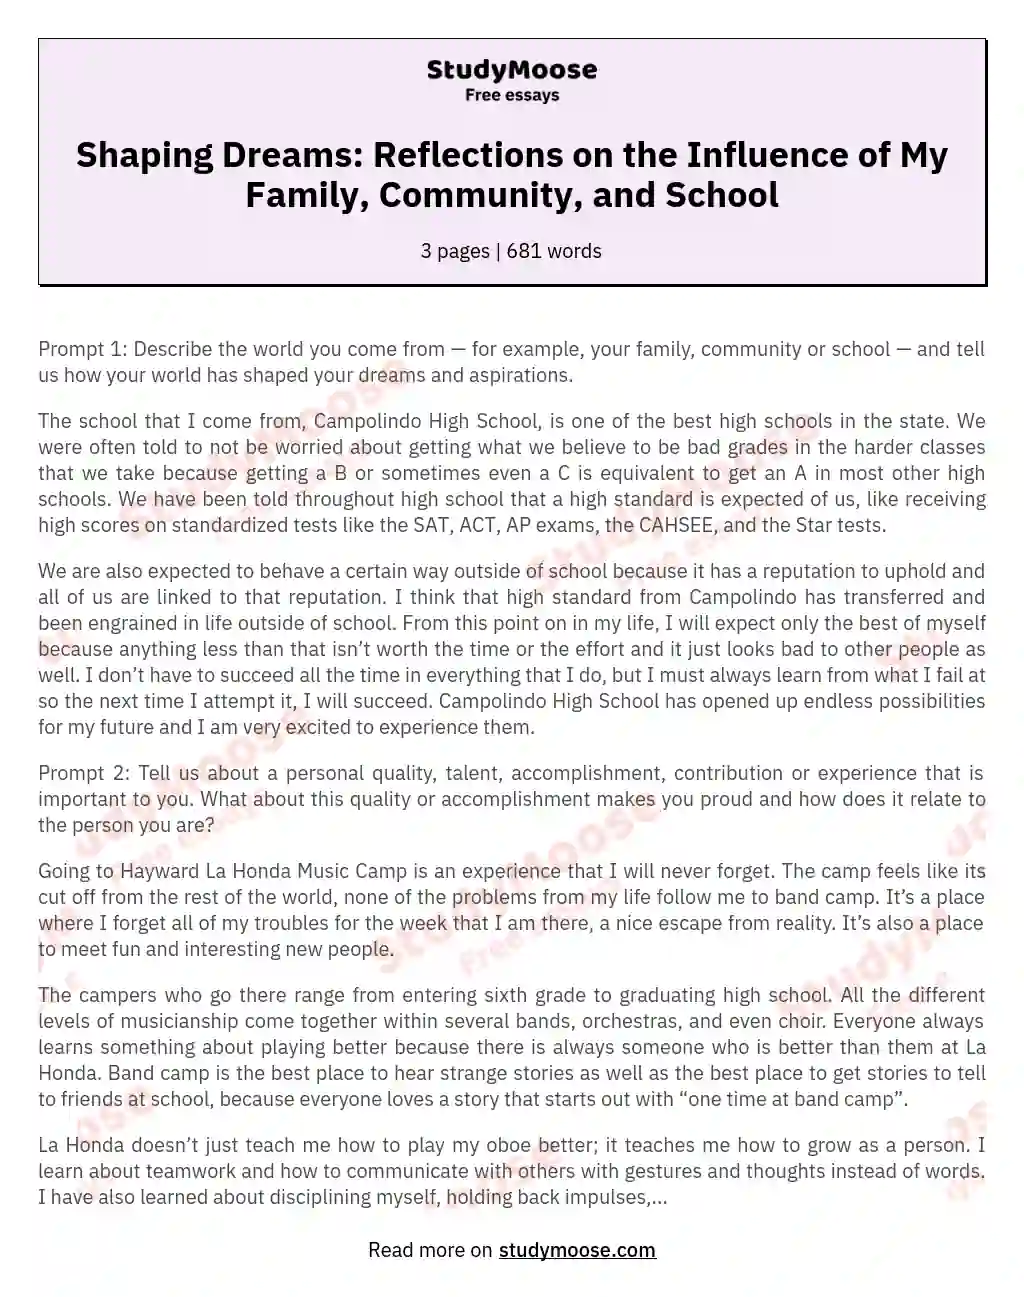 Shaping Dreams: Reflections on the Influence of My Family, Community, and School essay